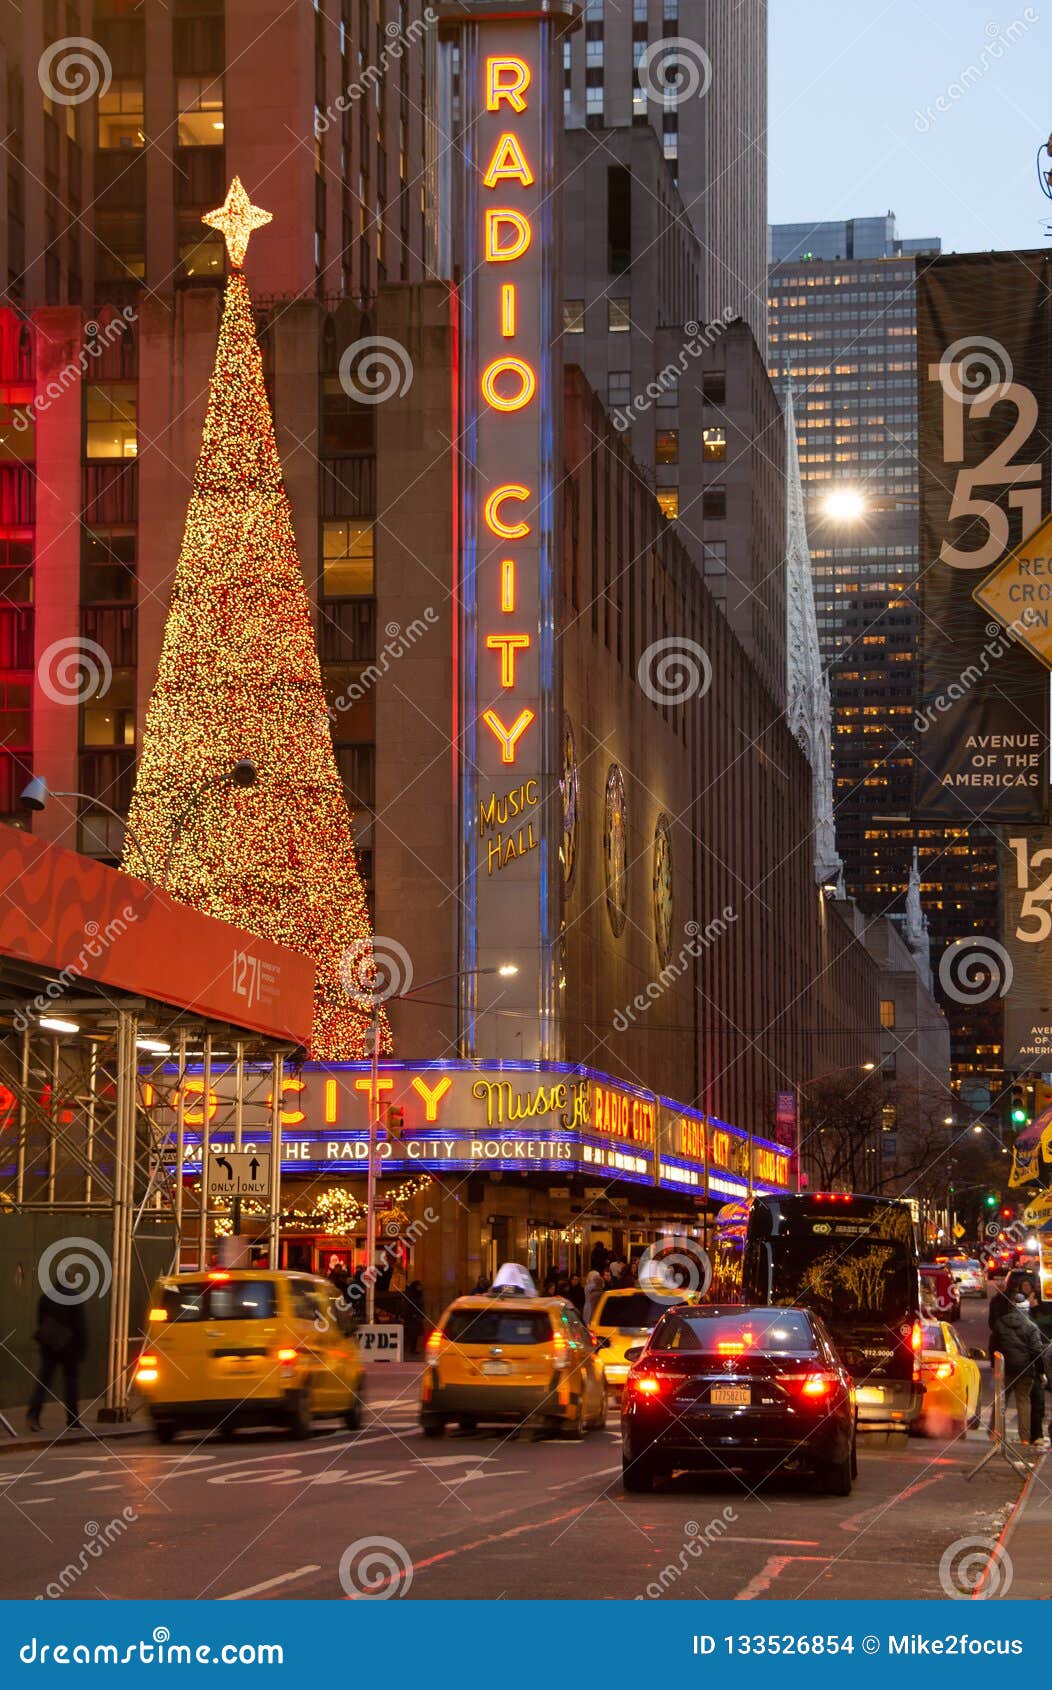 Radio City Music Hall Exterior In New York During Winter Holiday Editorial Stock Image - Image ...